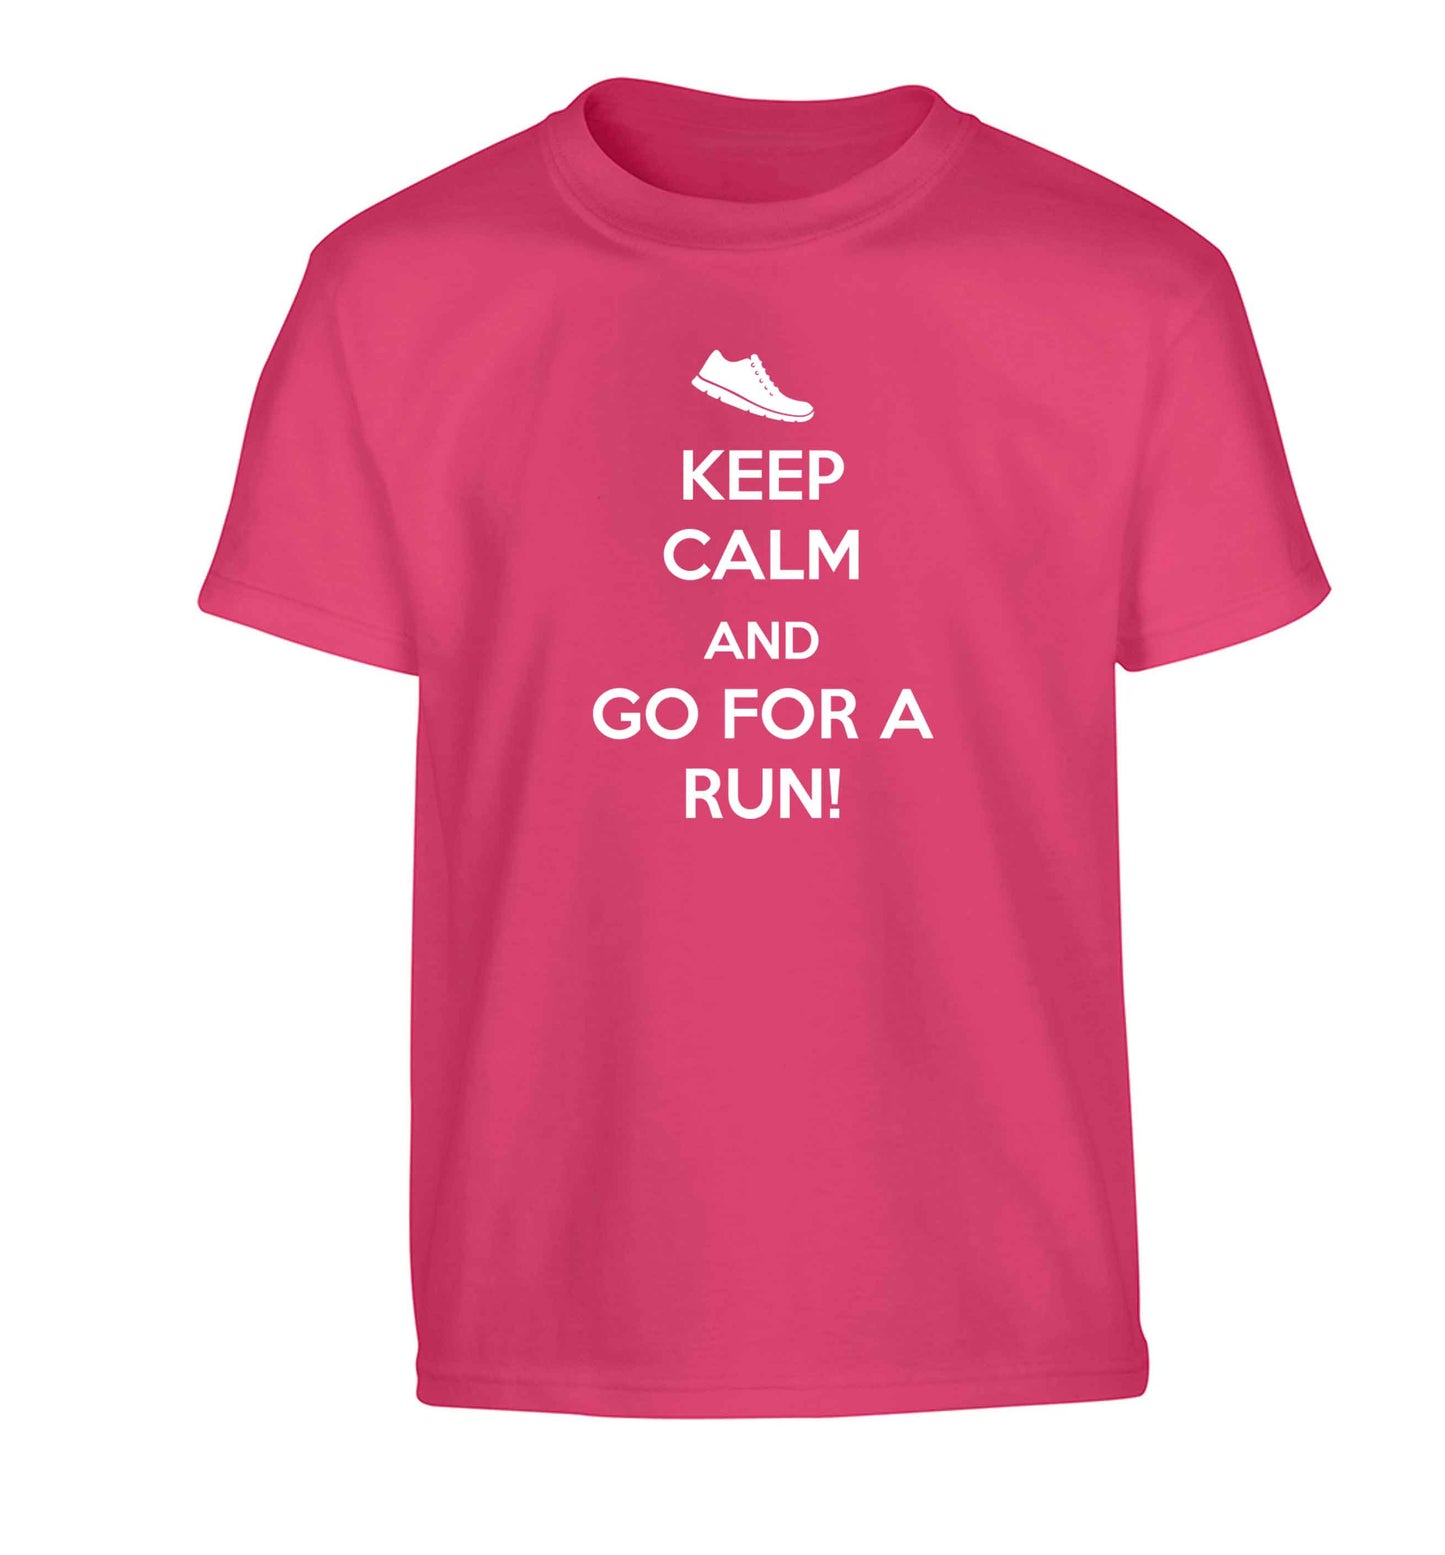 Keep calm and go for a run Children's pink Tshirt 12-13 Years